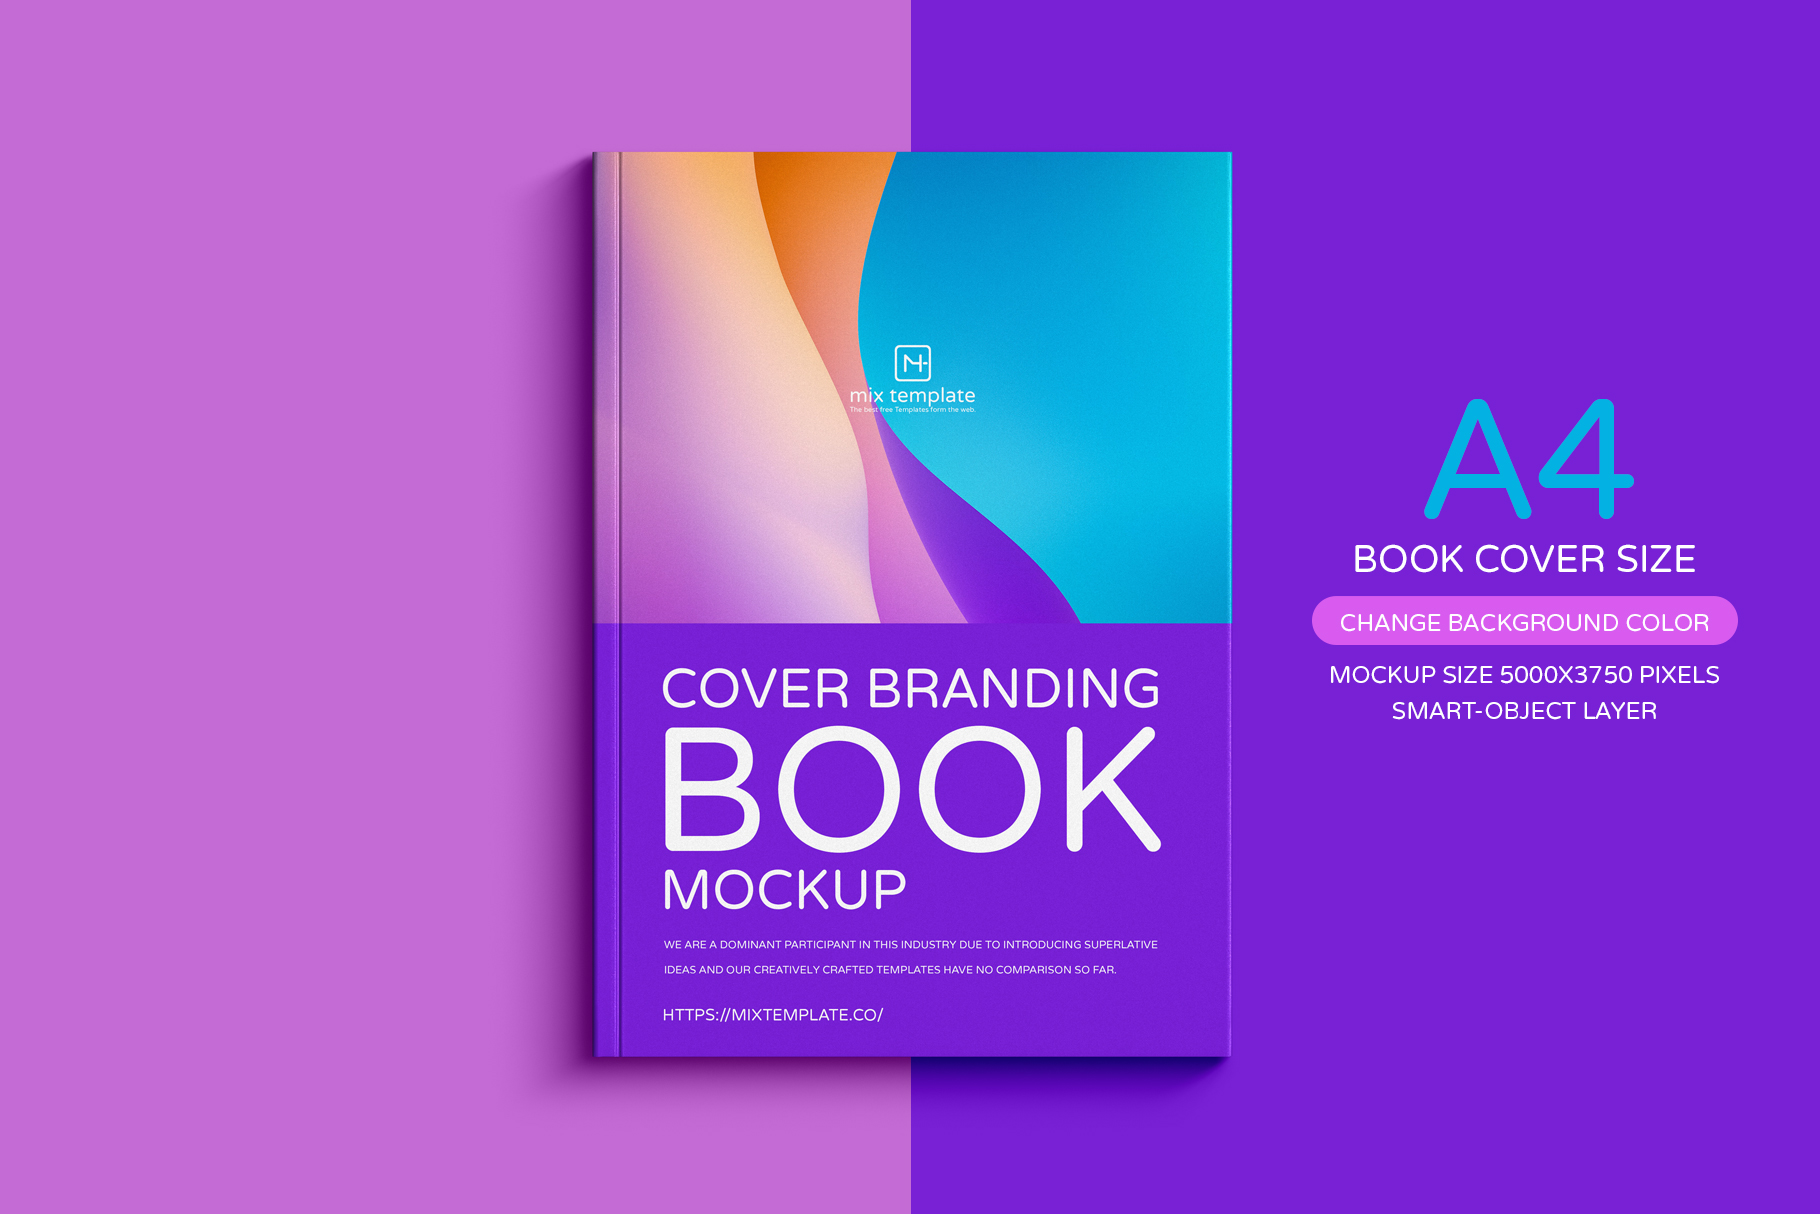 A4-Cover-Branding-Book-Mockup-Template